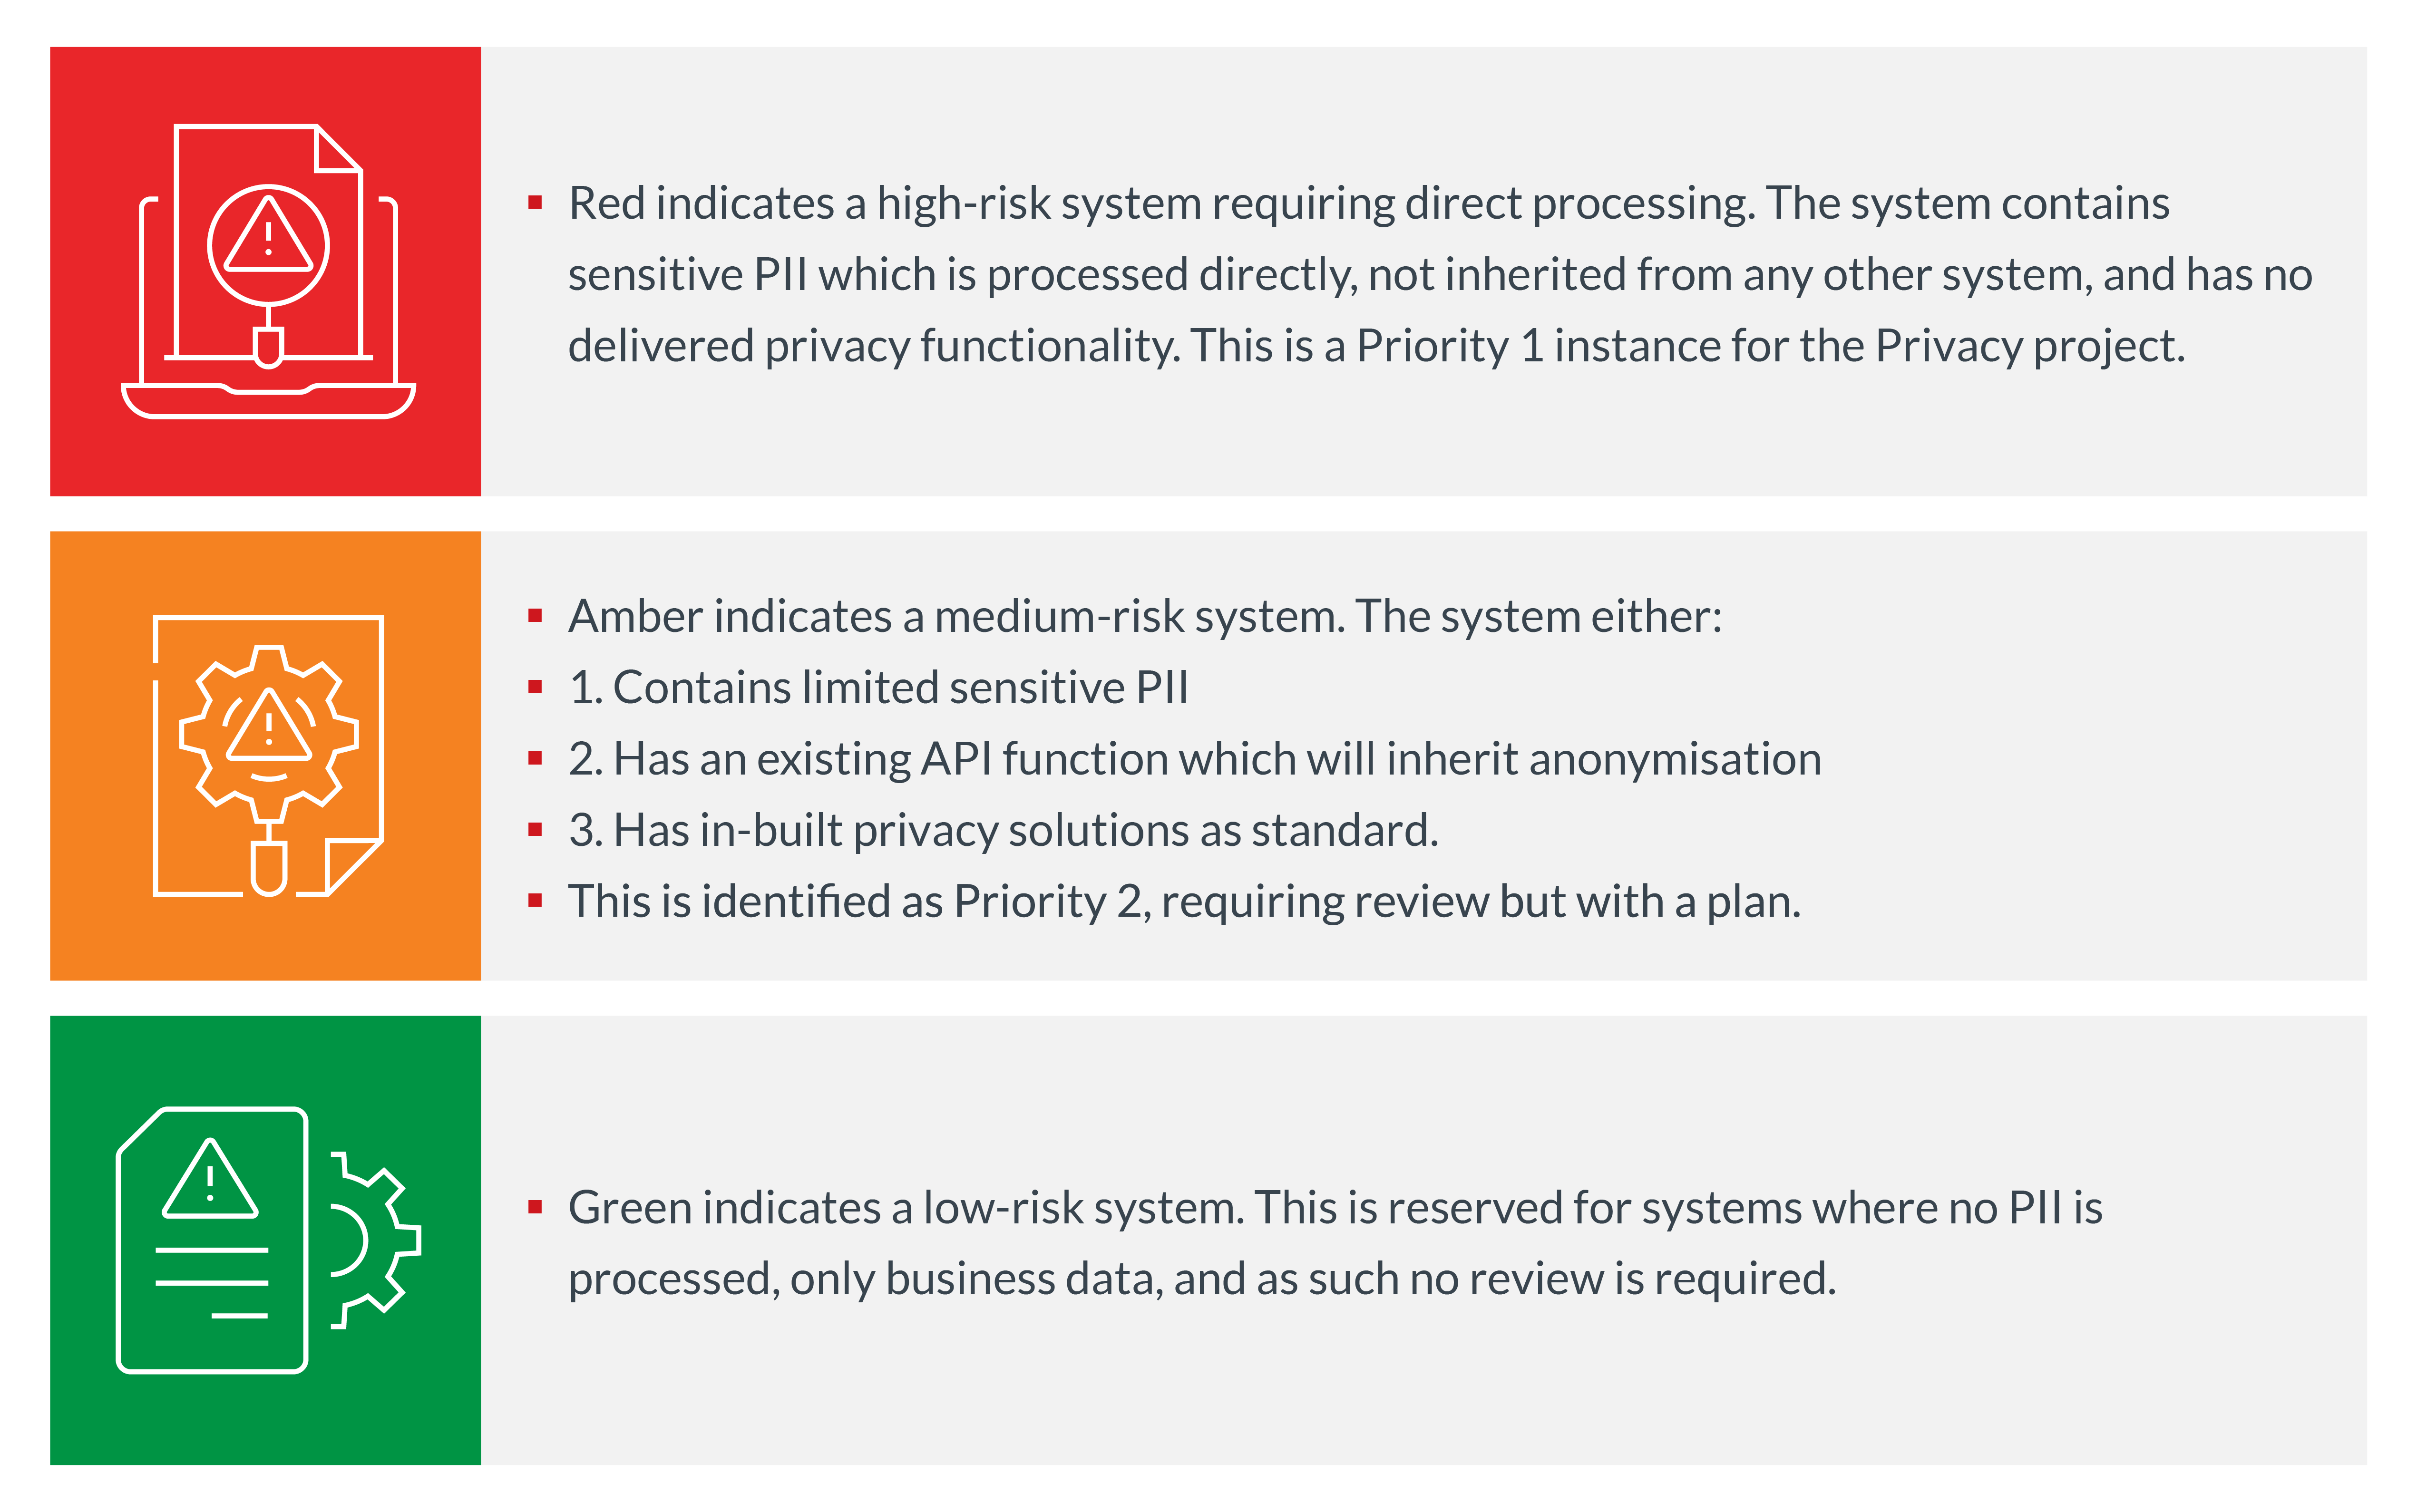 Data Privacy priority and level of risk:   RED indicates a high-risk system requiring direct processing. The system contains sensitive PII which is processed directly, not inherited from any other system, and has no delivered privacy functionality.  This is a Priority 1 instance for the Privacy project.  AMBER indicates a medium-risk system. The system either: 1.	Contains limited sensitive PII 2.	Has an existing API function which will inherit anonymisation 3.	Has in-built privacy solutions as standard. This is identified as Priority 2, requiring review but with a plan.  GREEN indicates a low-risk system. This is reserved for systems where no PII is processed, only business data, and as such no review is required. 